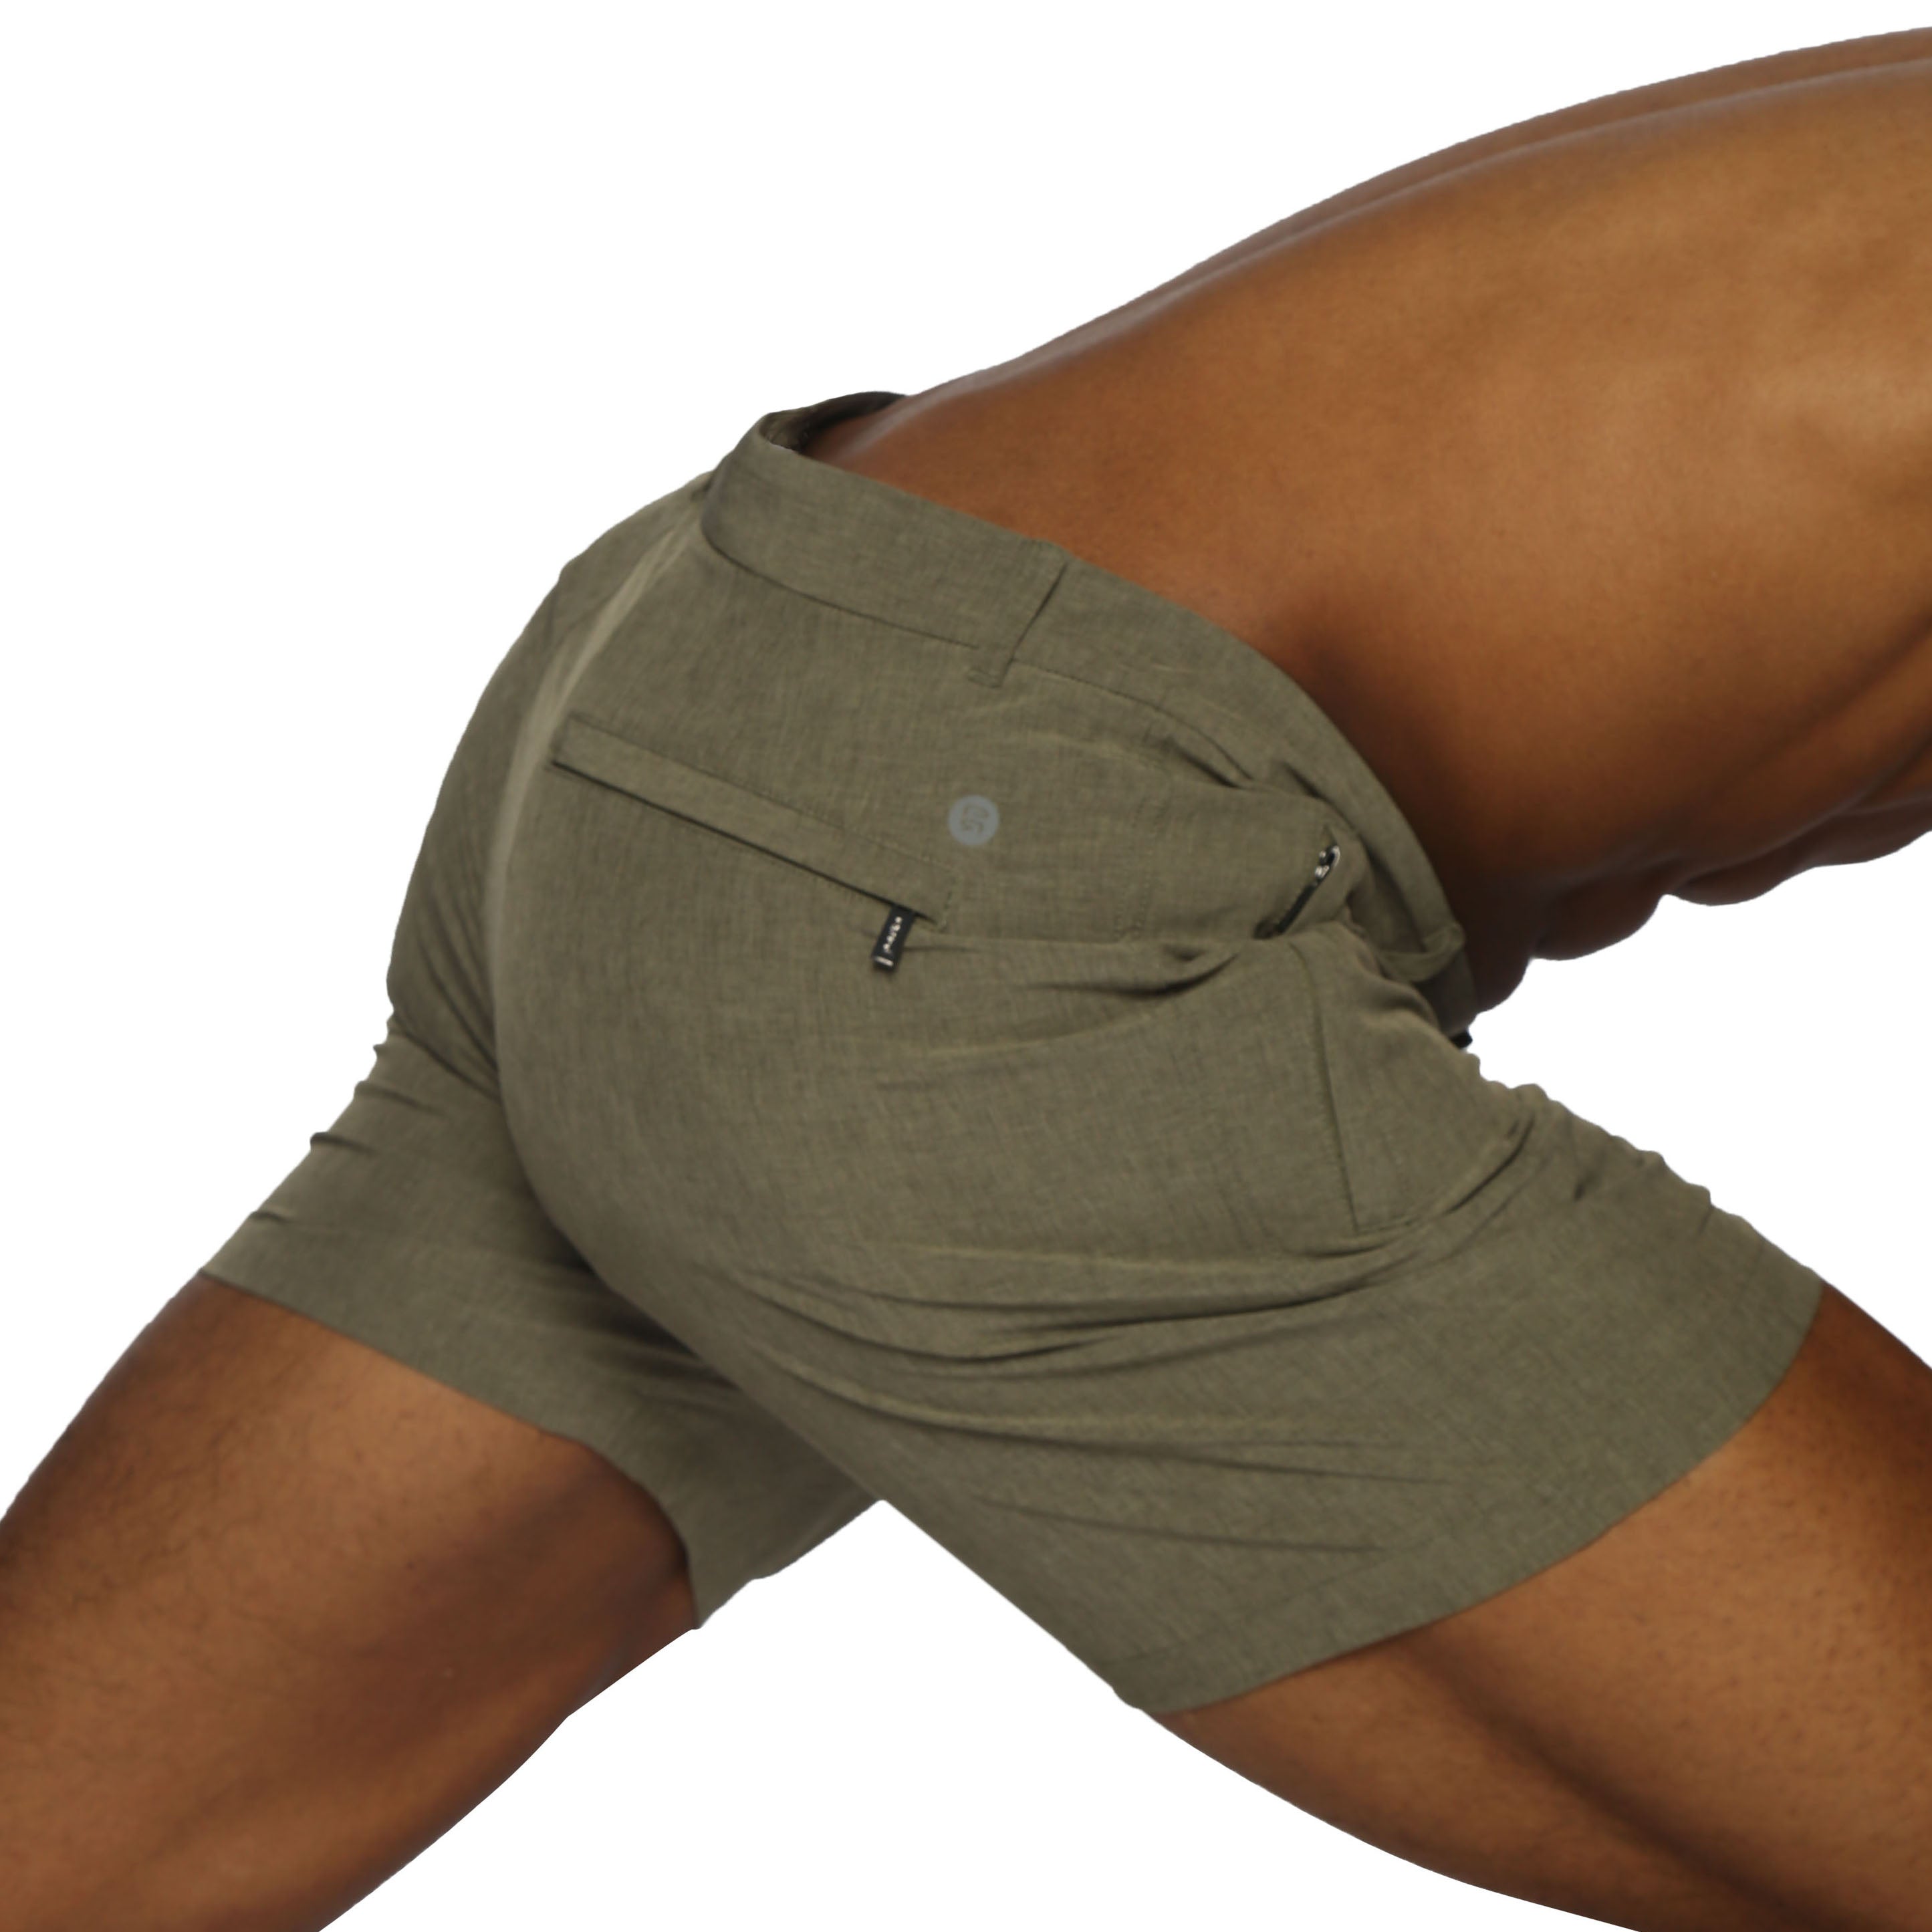 NEW COLOR- Army Green Action Stretch Holler Short